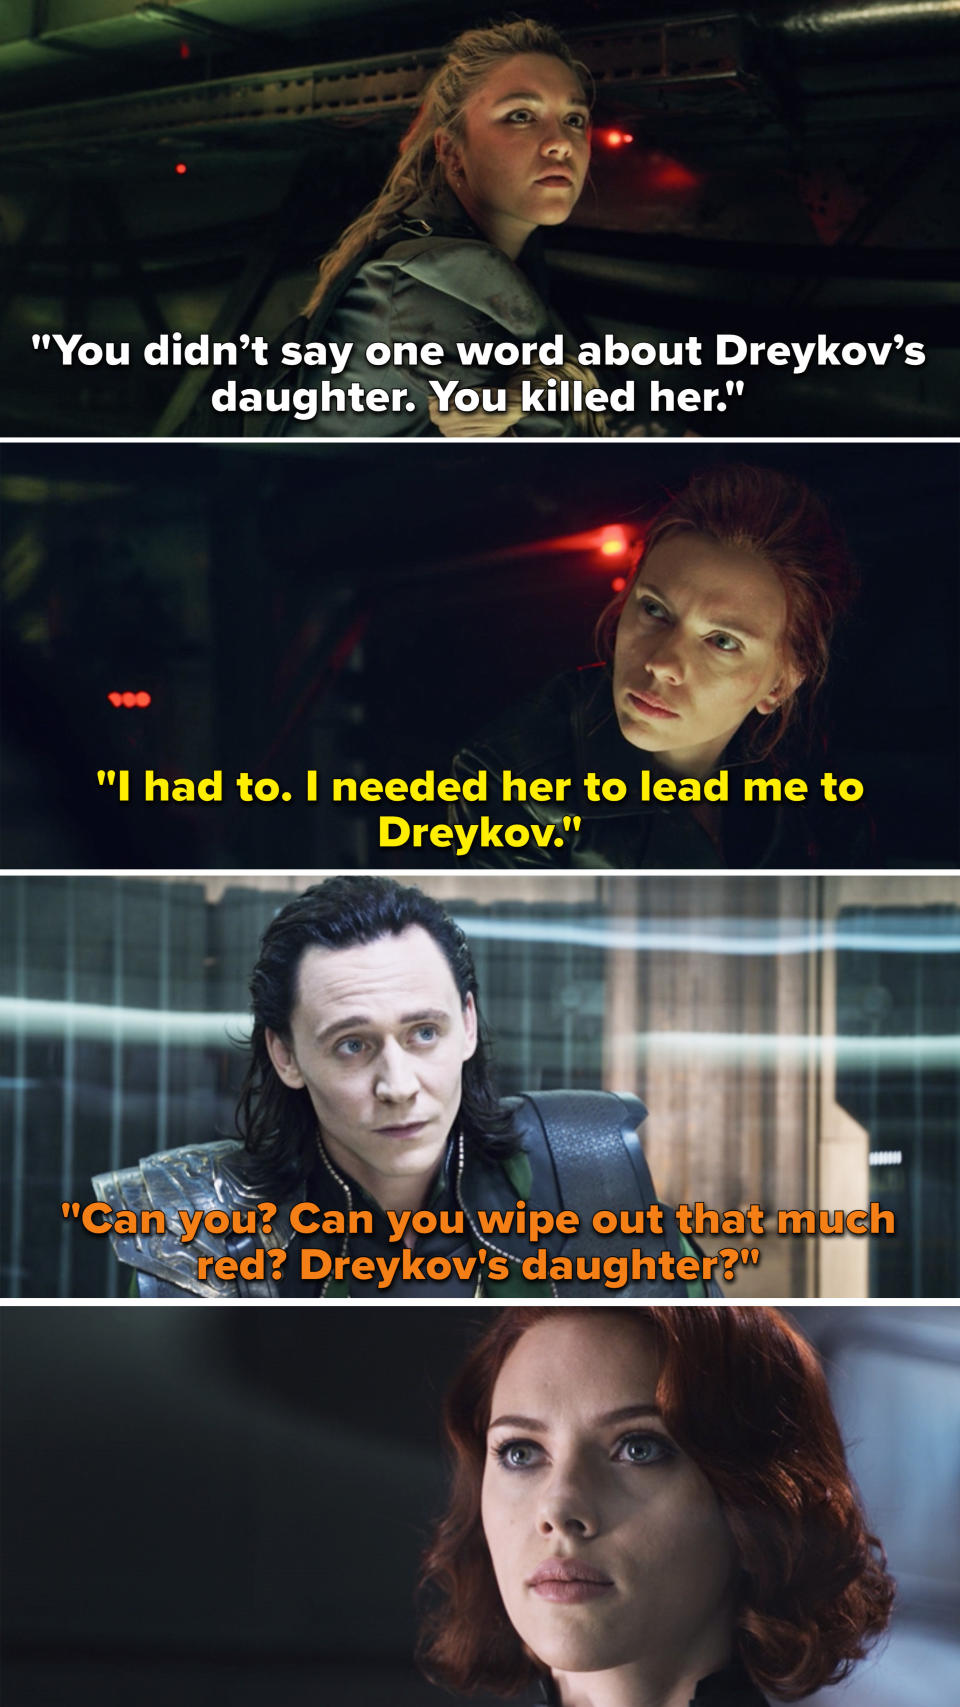 Loki telling Natasha, "Can you? Can you wipe out that much red? Dreykov's daughter?"